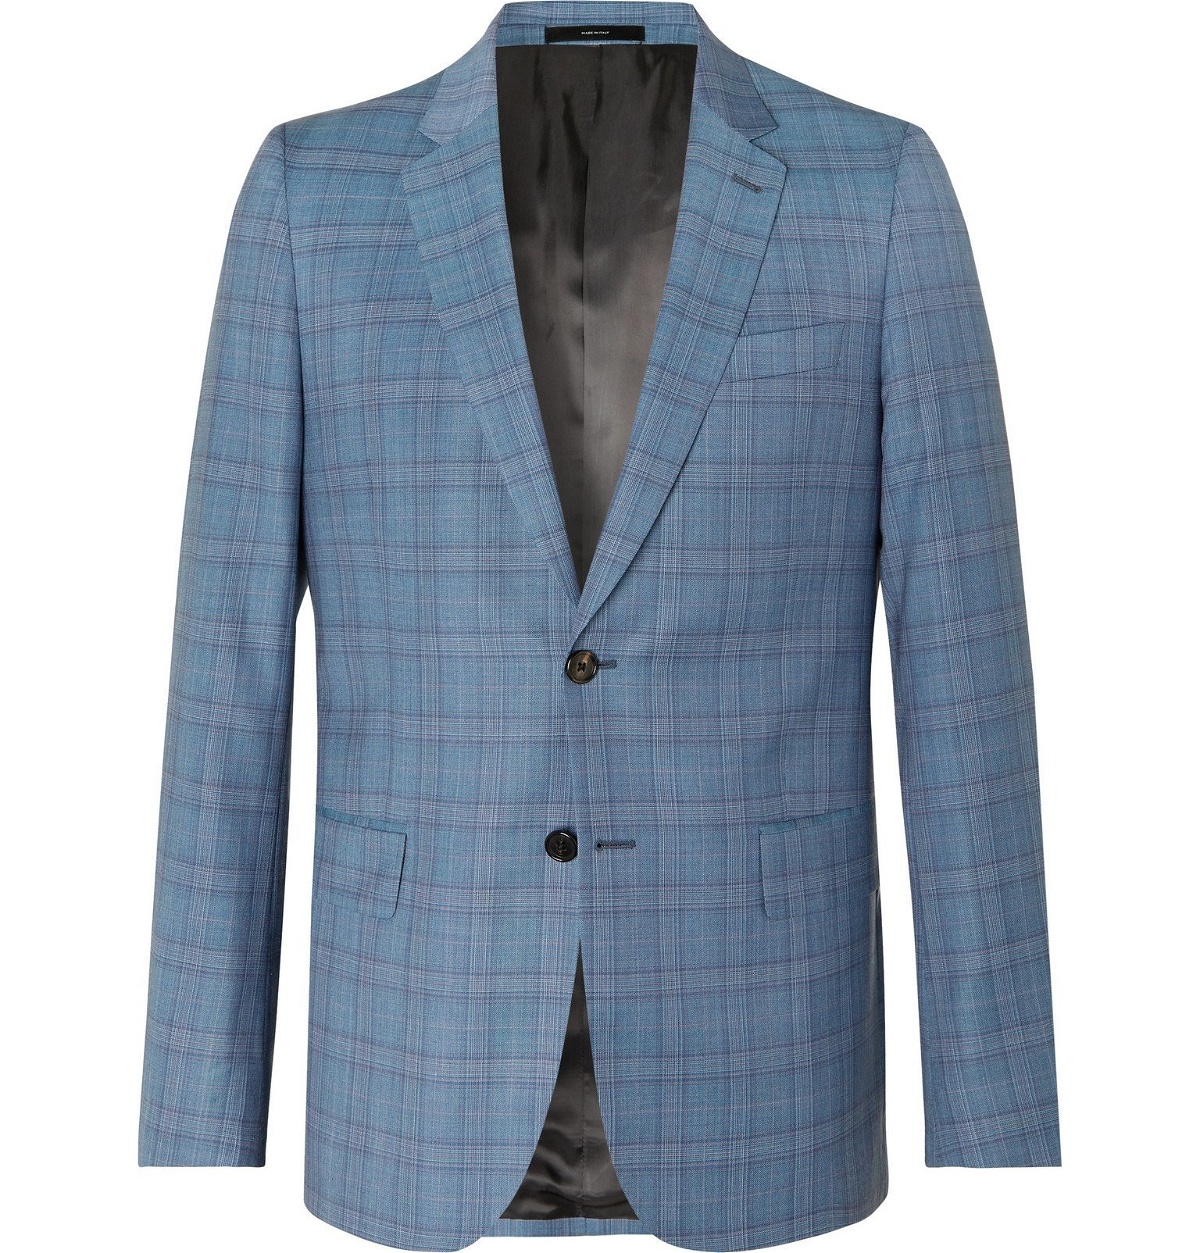 Paul Smith - Blue Soho Slim-Fit Prince of Wales Checked Wool Suit